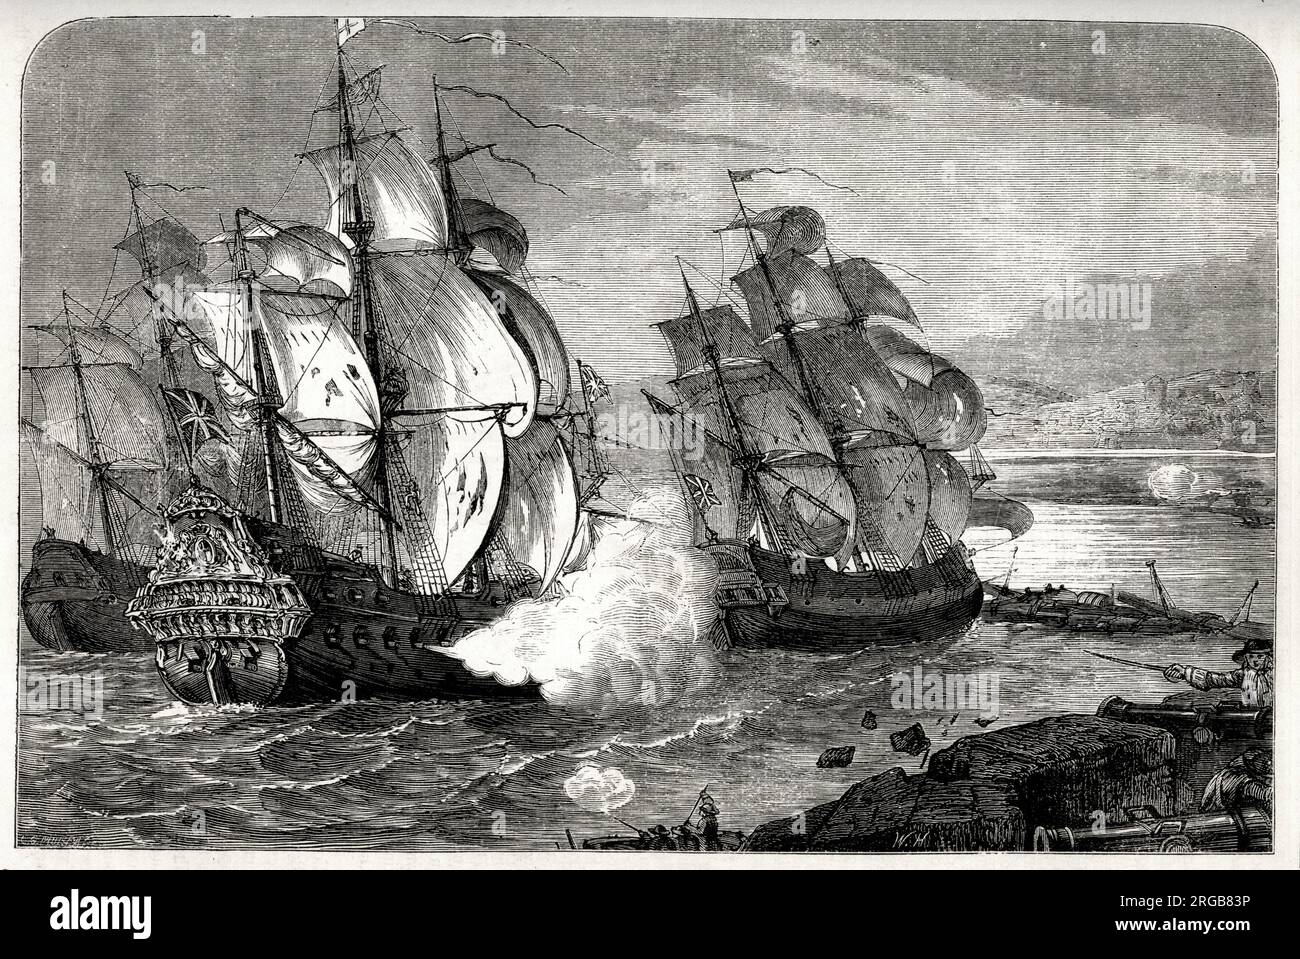 HMS Dartmouth fires at shore batteries while the Mountjoy, a merchant ship, rams and breaches the boom, Londonderry, Ireland, 28 July 1689. Both ships, along with two others, were bringing provisions for the starving people in the besieged city (Siege of Derry, 18 April to 1 August). The food was delivered, and the siege was broken. Stock Photo